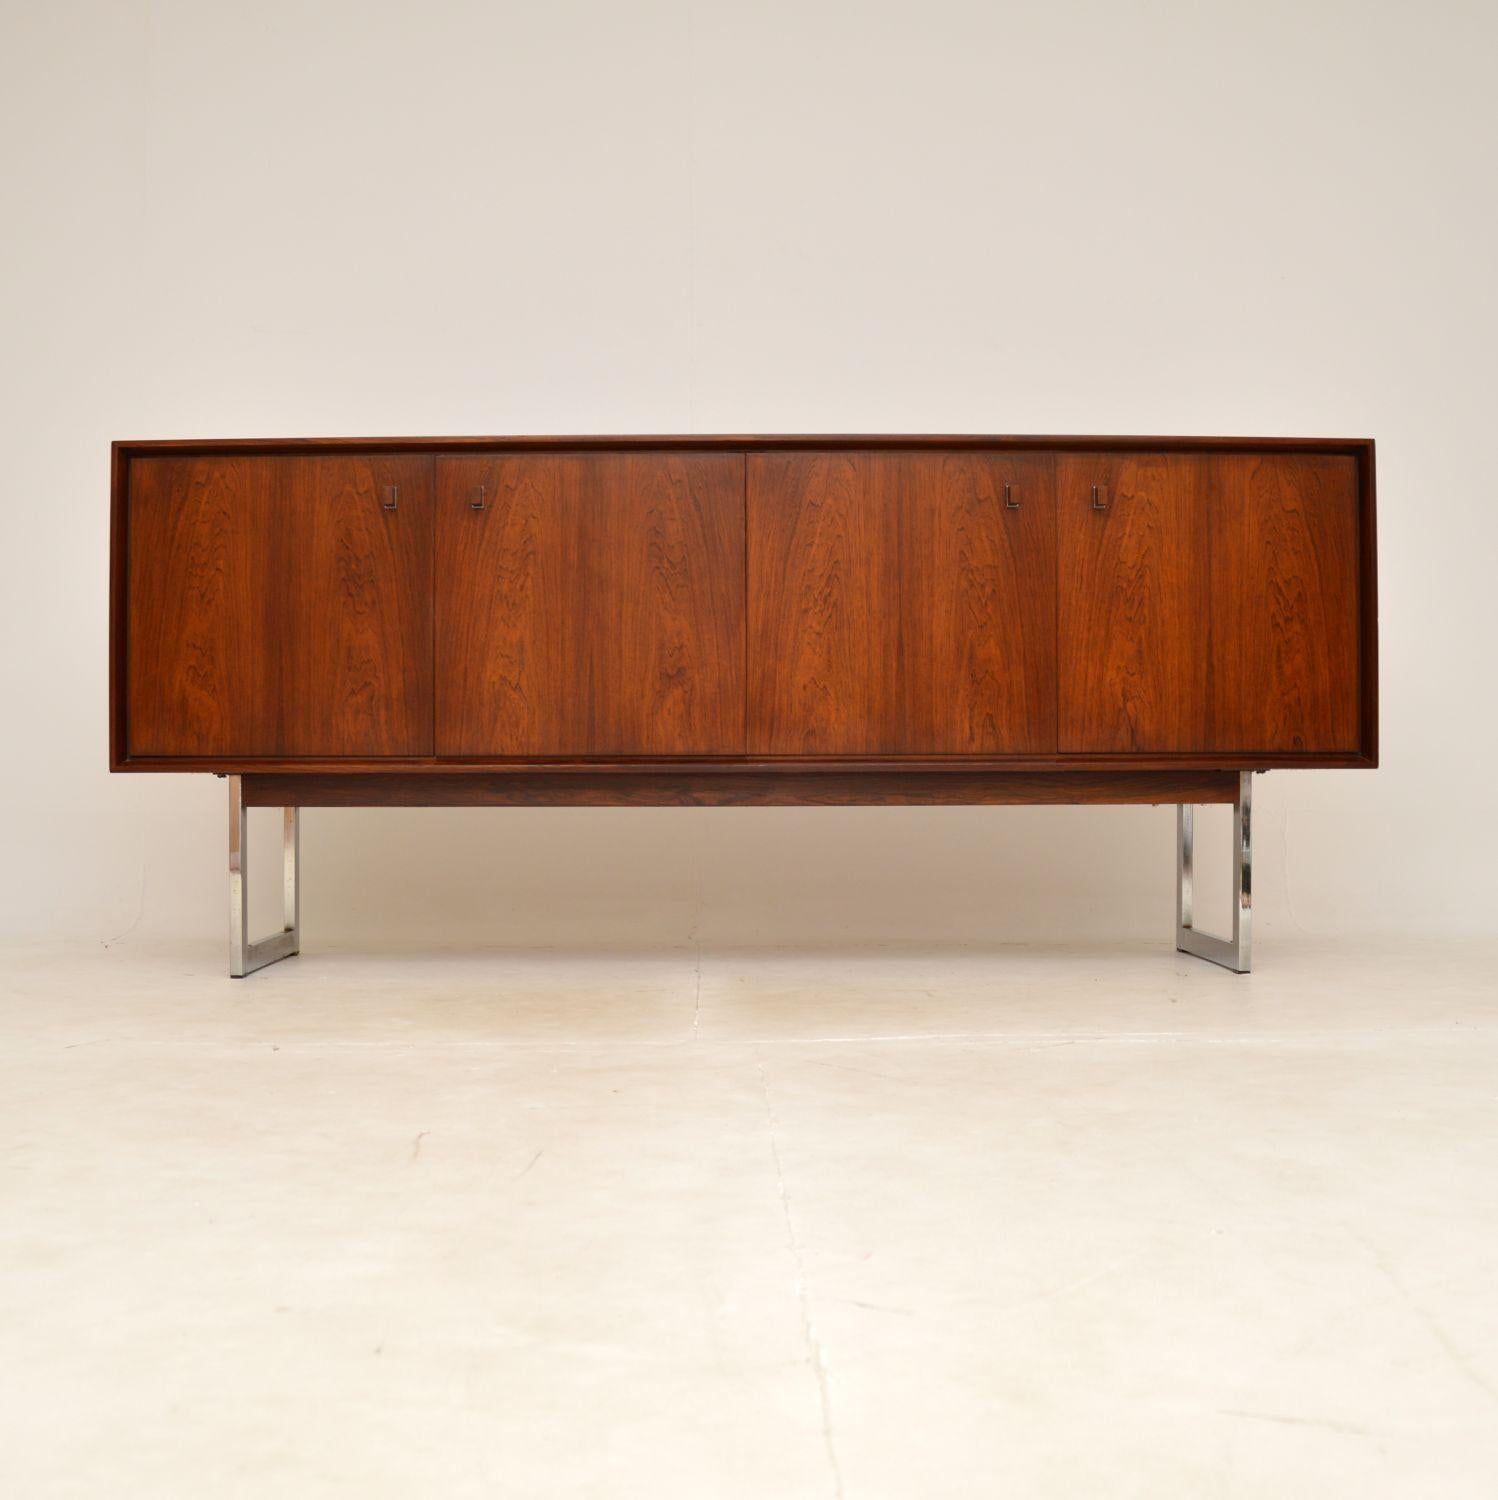 A stylish and extremely well made vintage Danish sideboard. This was recently imported from Denmark, it dates from the 1960s.

It is of superb quality, the wood has stunning grain patterns and a gorgeous colour tone. This sits on beautifully